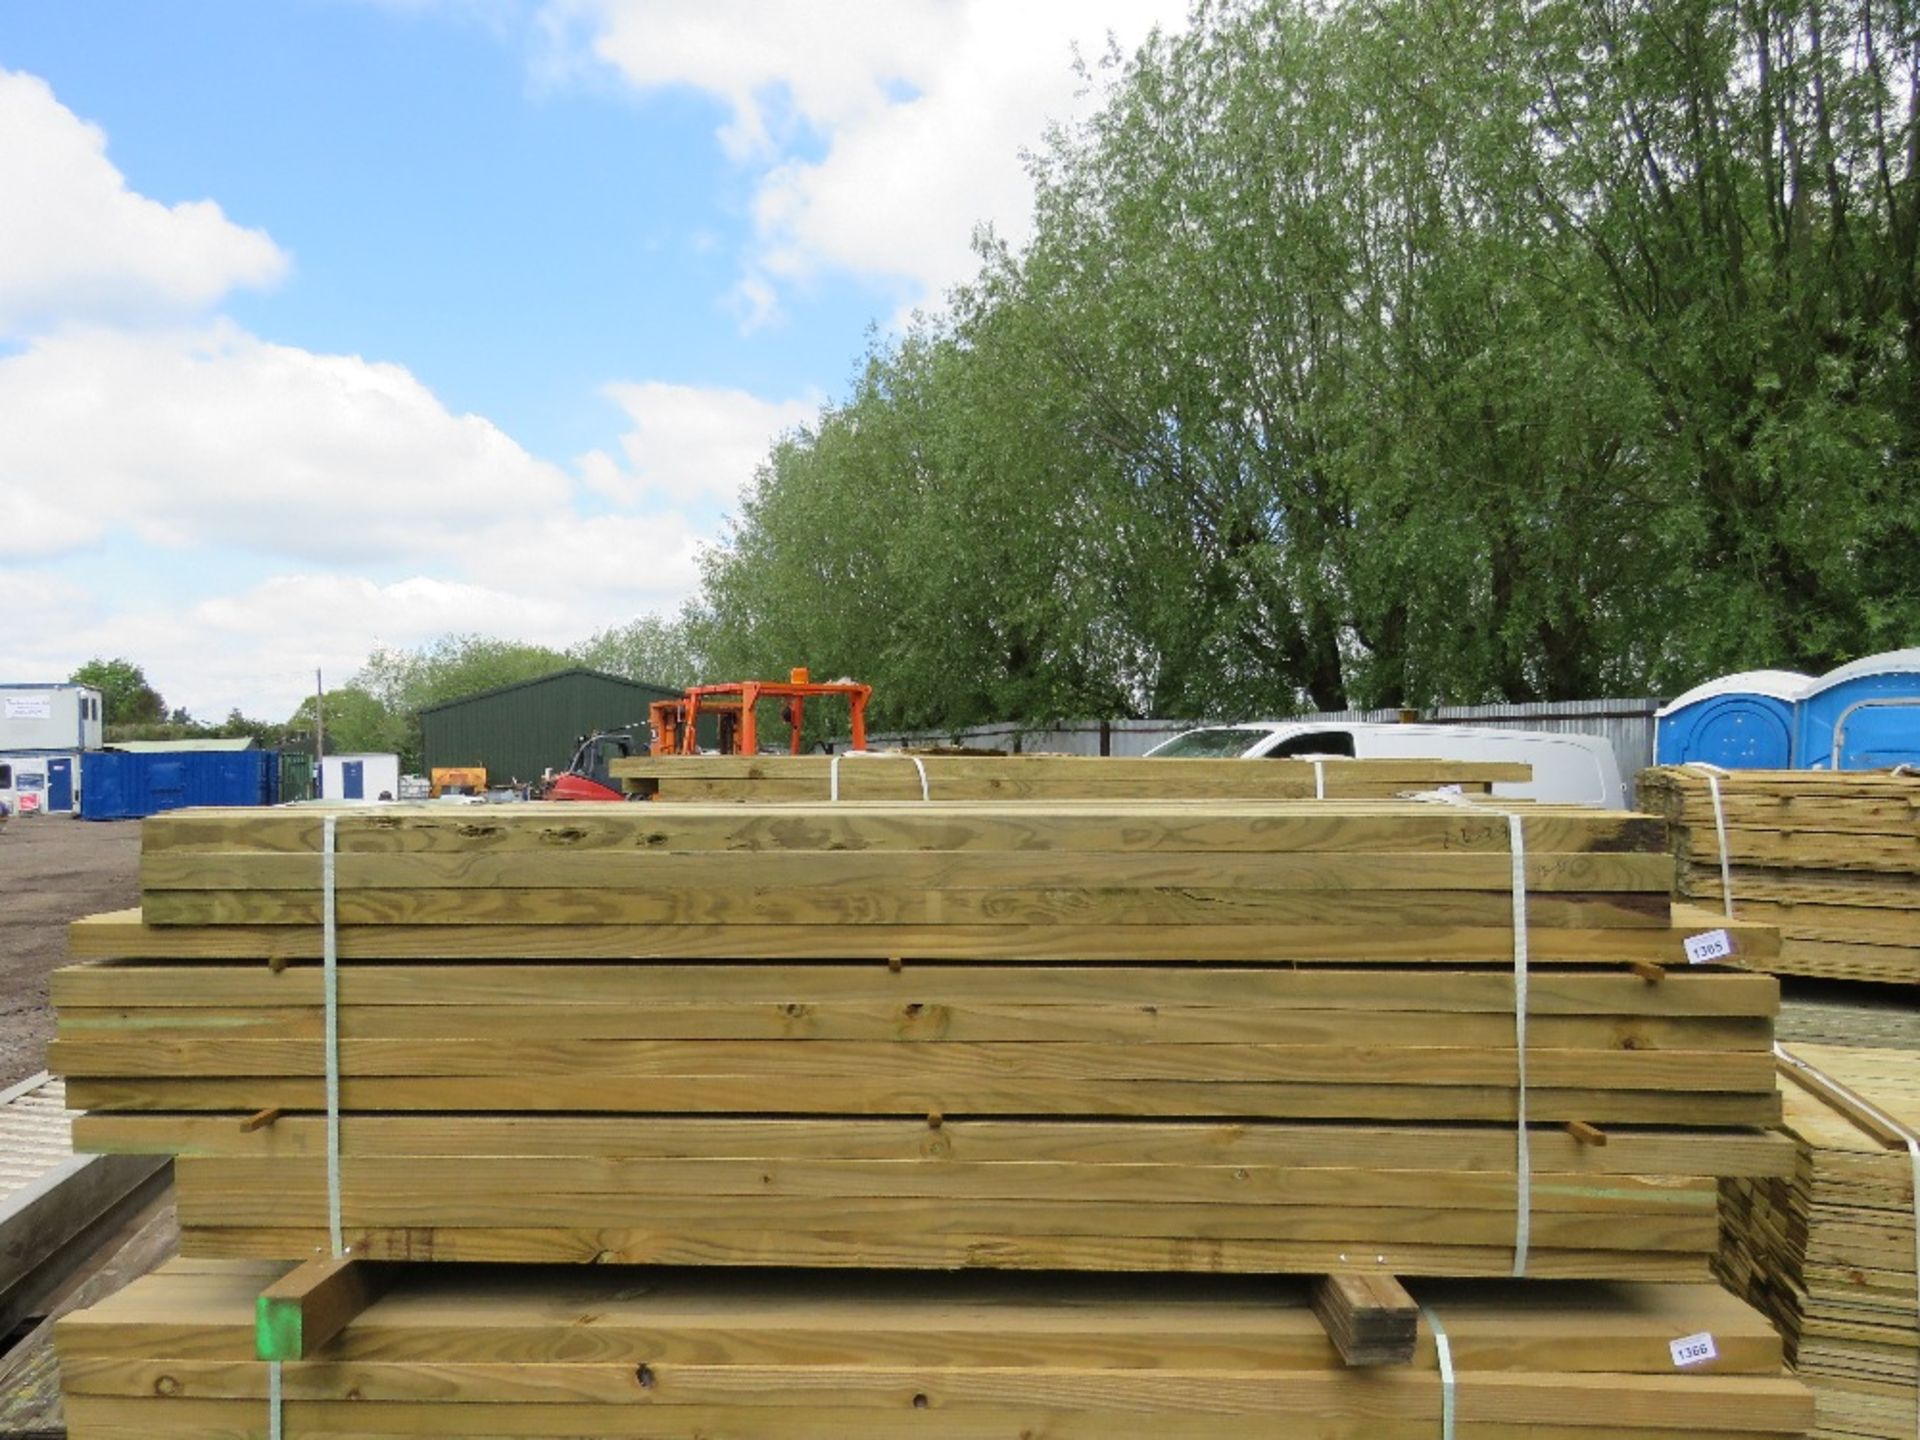 LARGE BUNDLE OF TIMBER BATTENS 2.4-2.7M LENGTH APPROX.